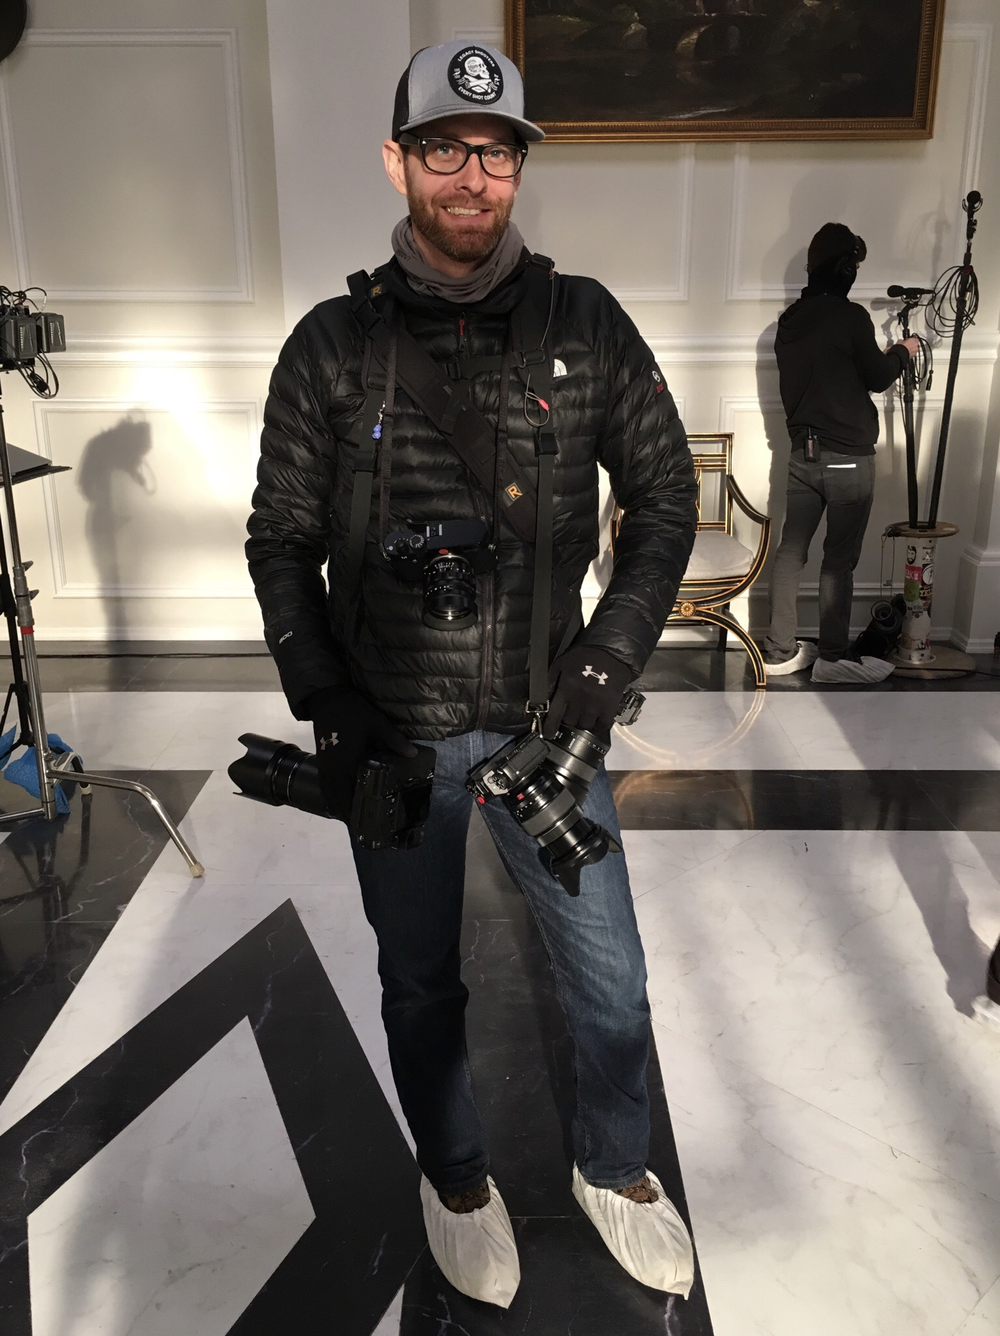 Curtis Bonds Baker, pictured on set, is a unit photographer for feature films and TV in the Atlanta area.